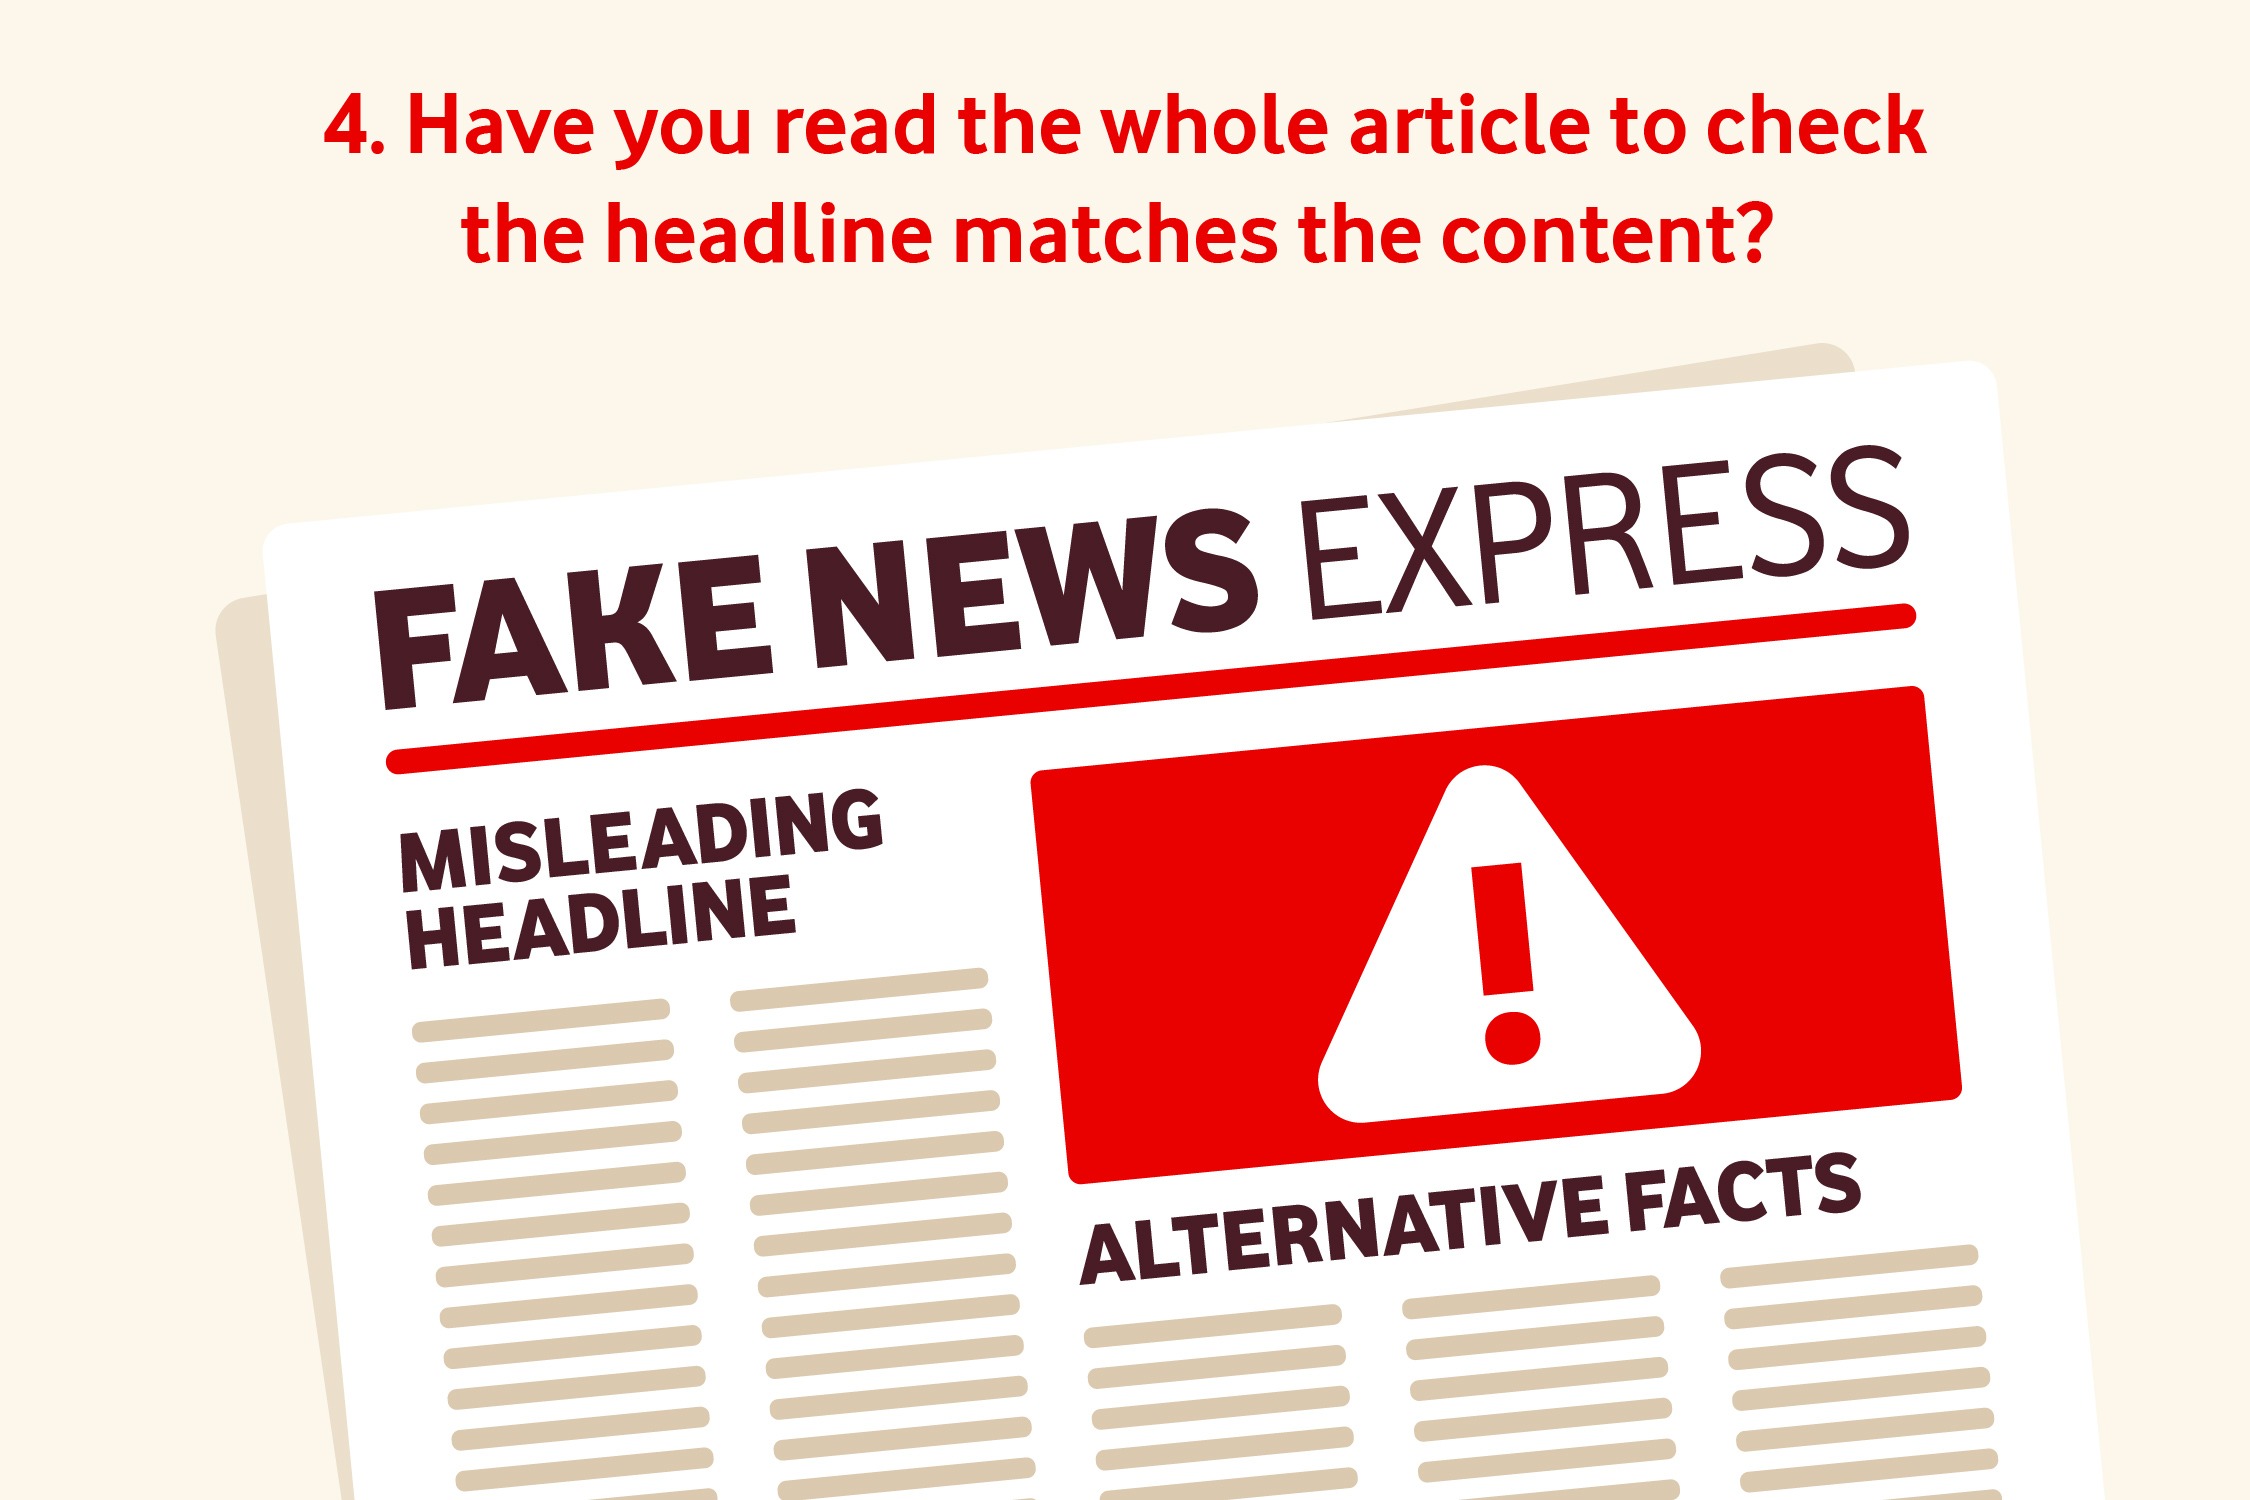 4. Have you read the whole article to check the headline matches the content